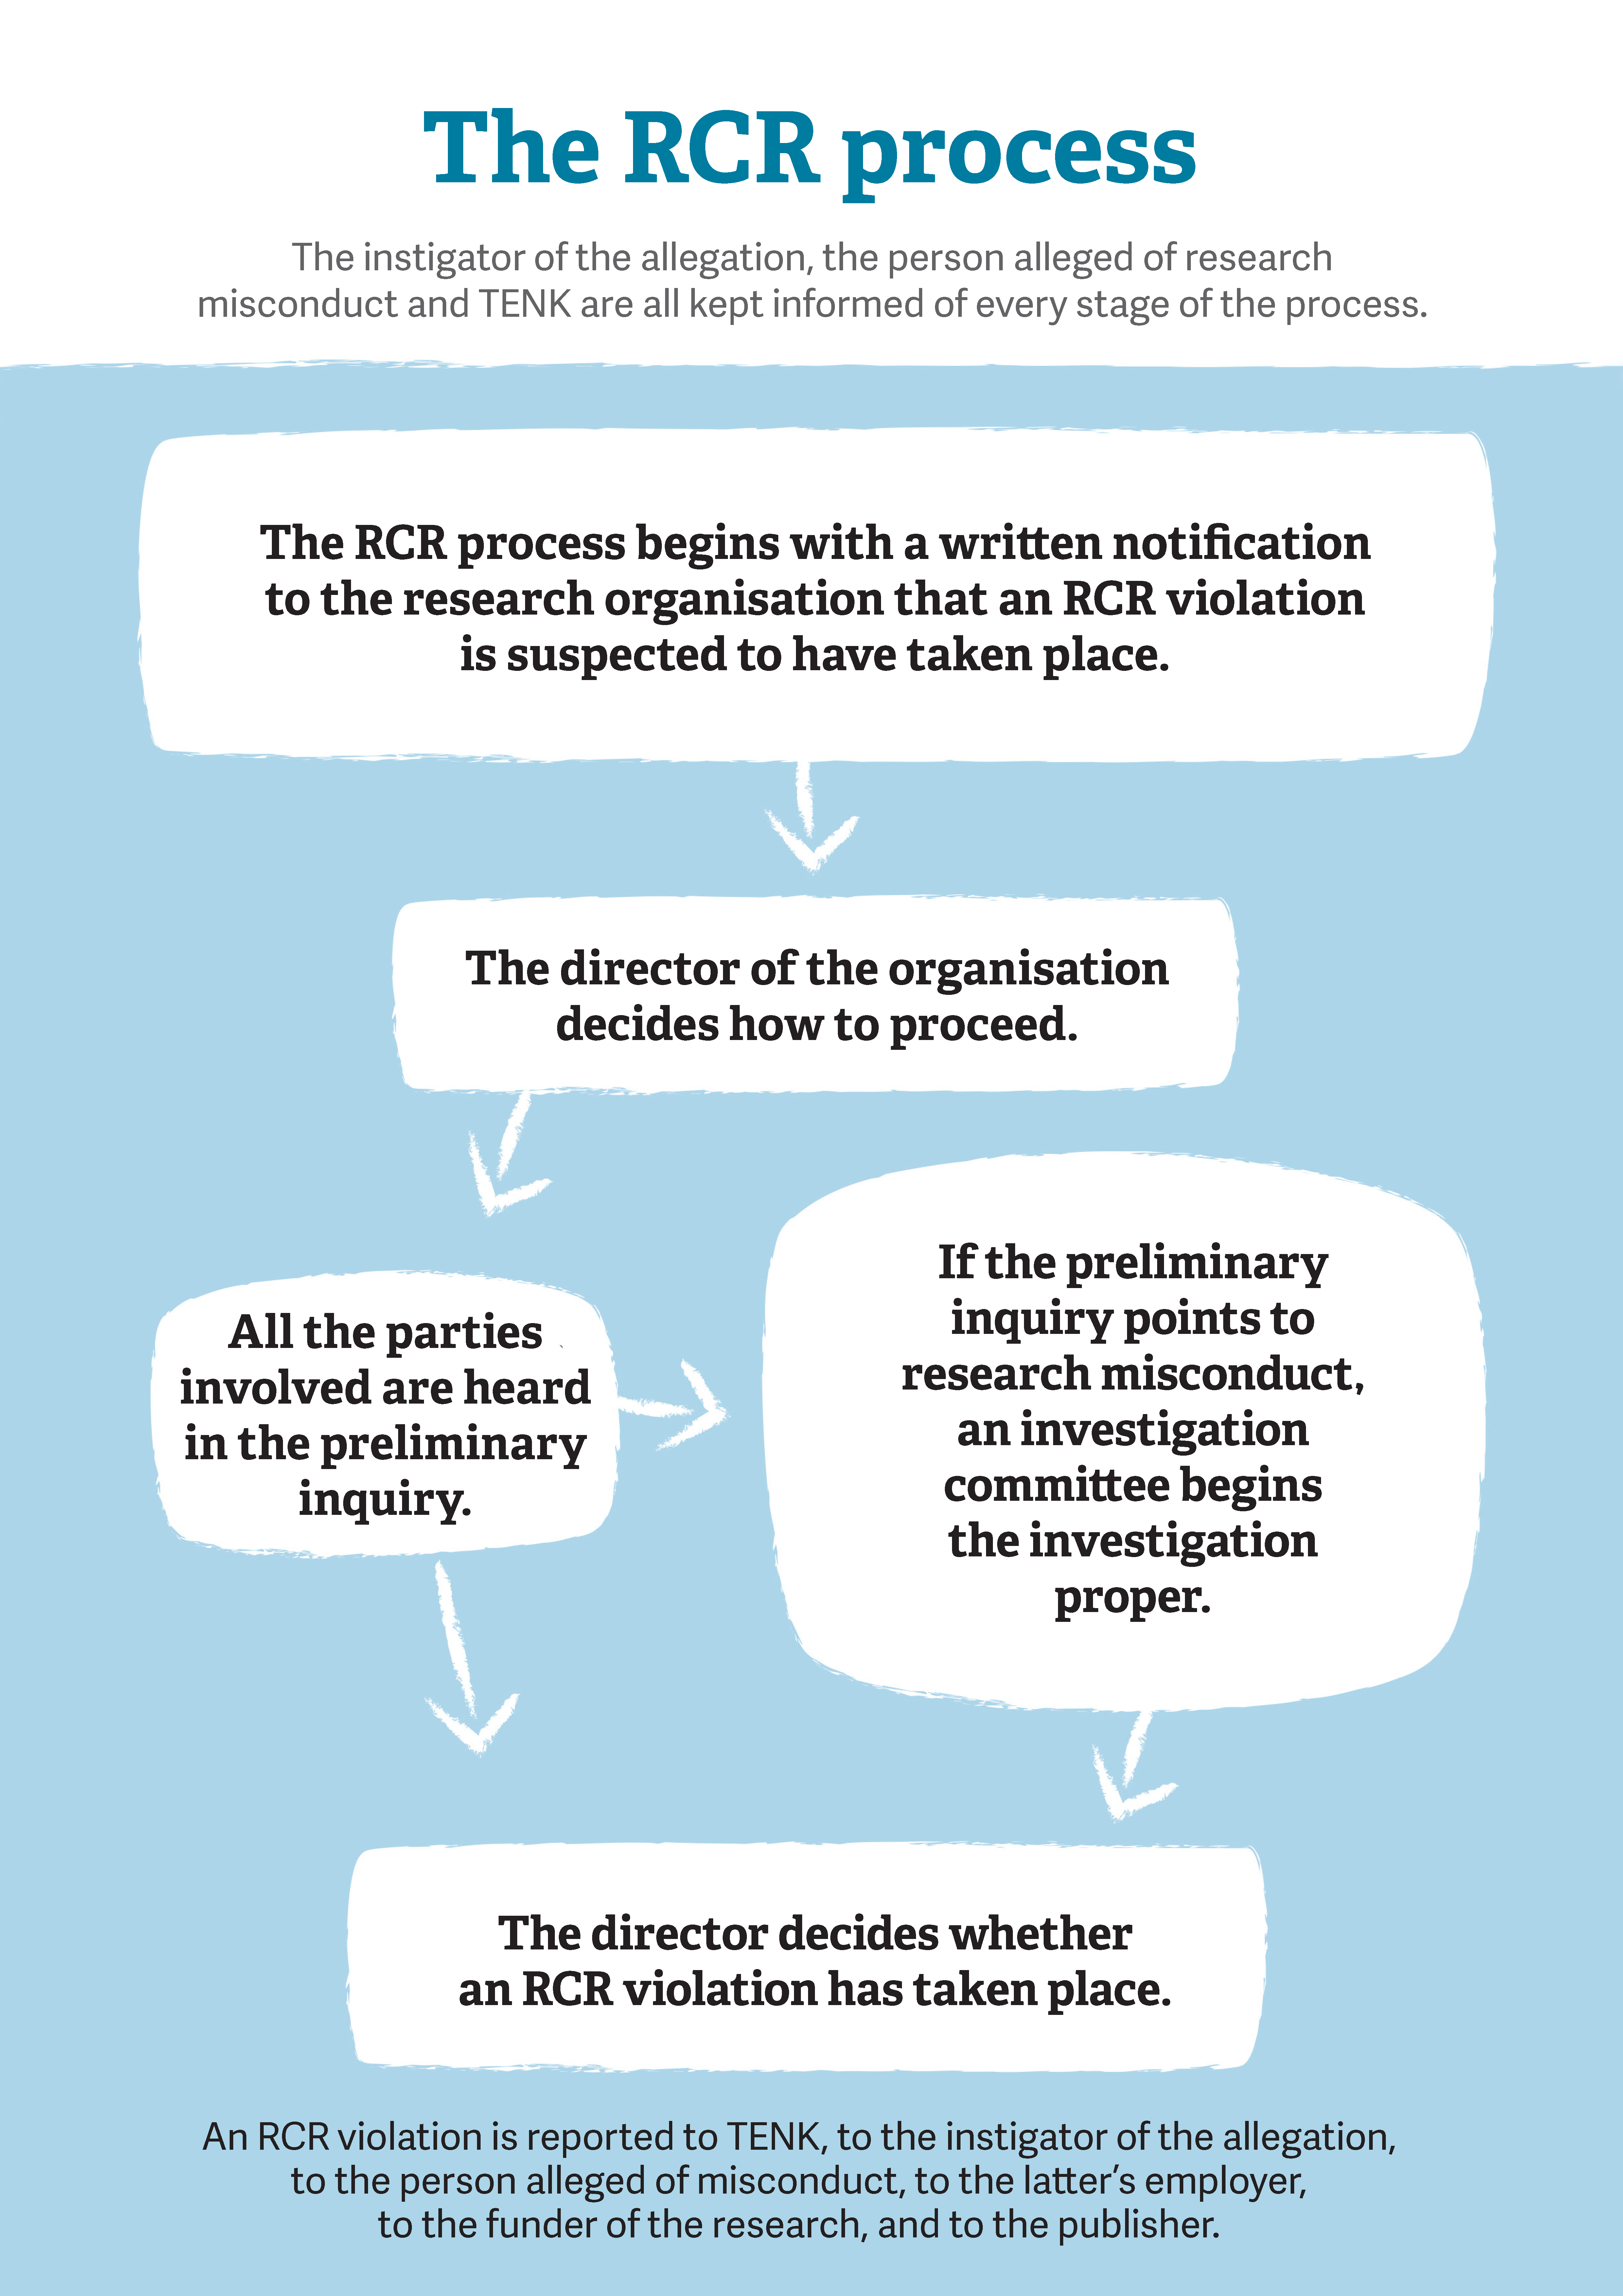 A shortened version of the RCR process described in the text.